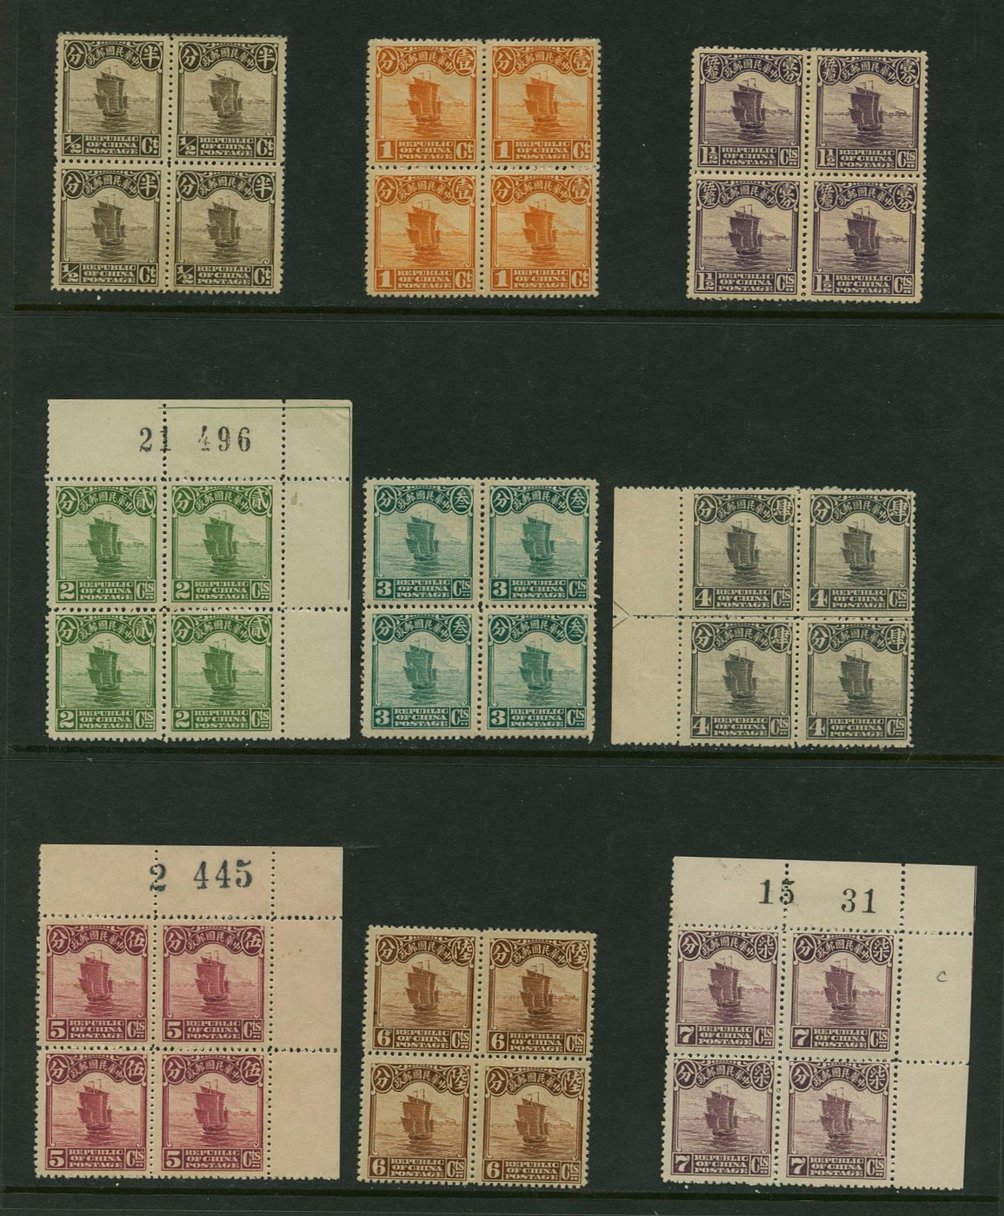 248-54 and 256-62 Second Peking Print in blocks of four, 6c is 324, most top two LH, 252 light toned spots on gum, 253 light crease, 257 light toned spot, CV $600+ (2 images)